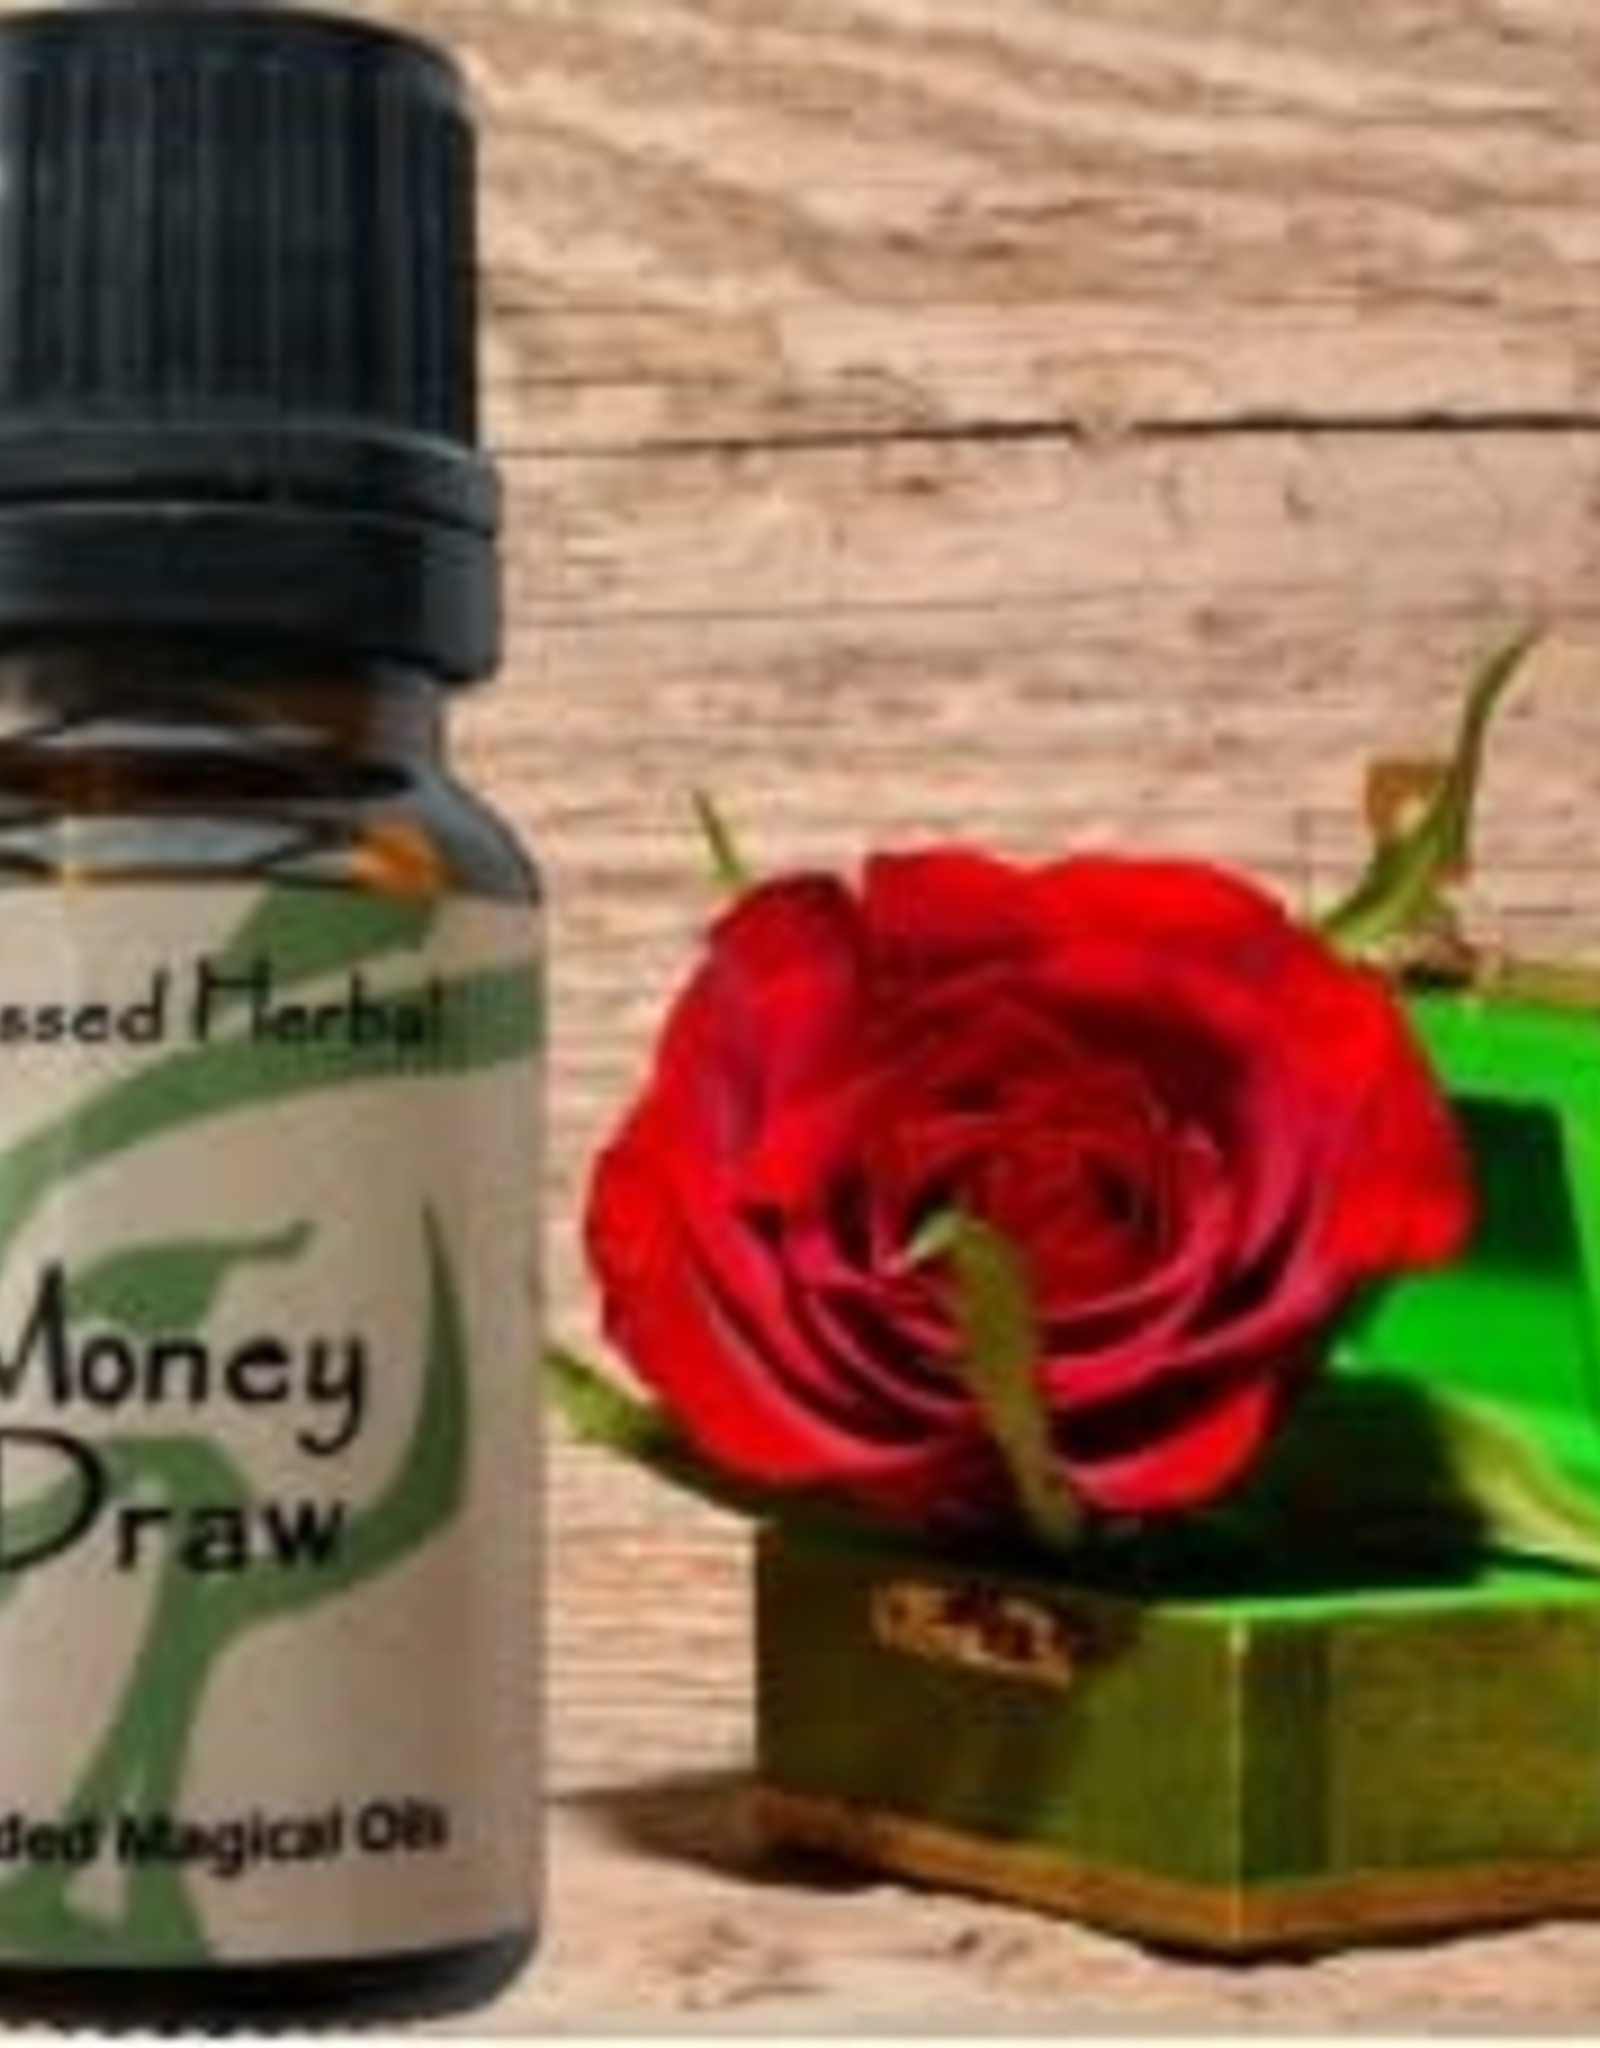 Oil Blessed Herbal Money Draw